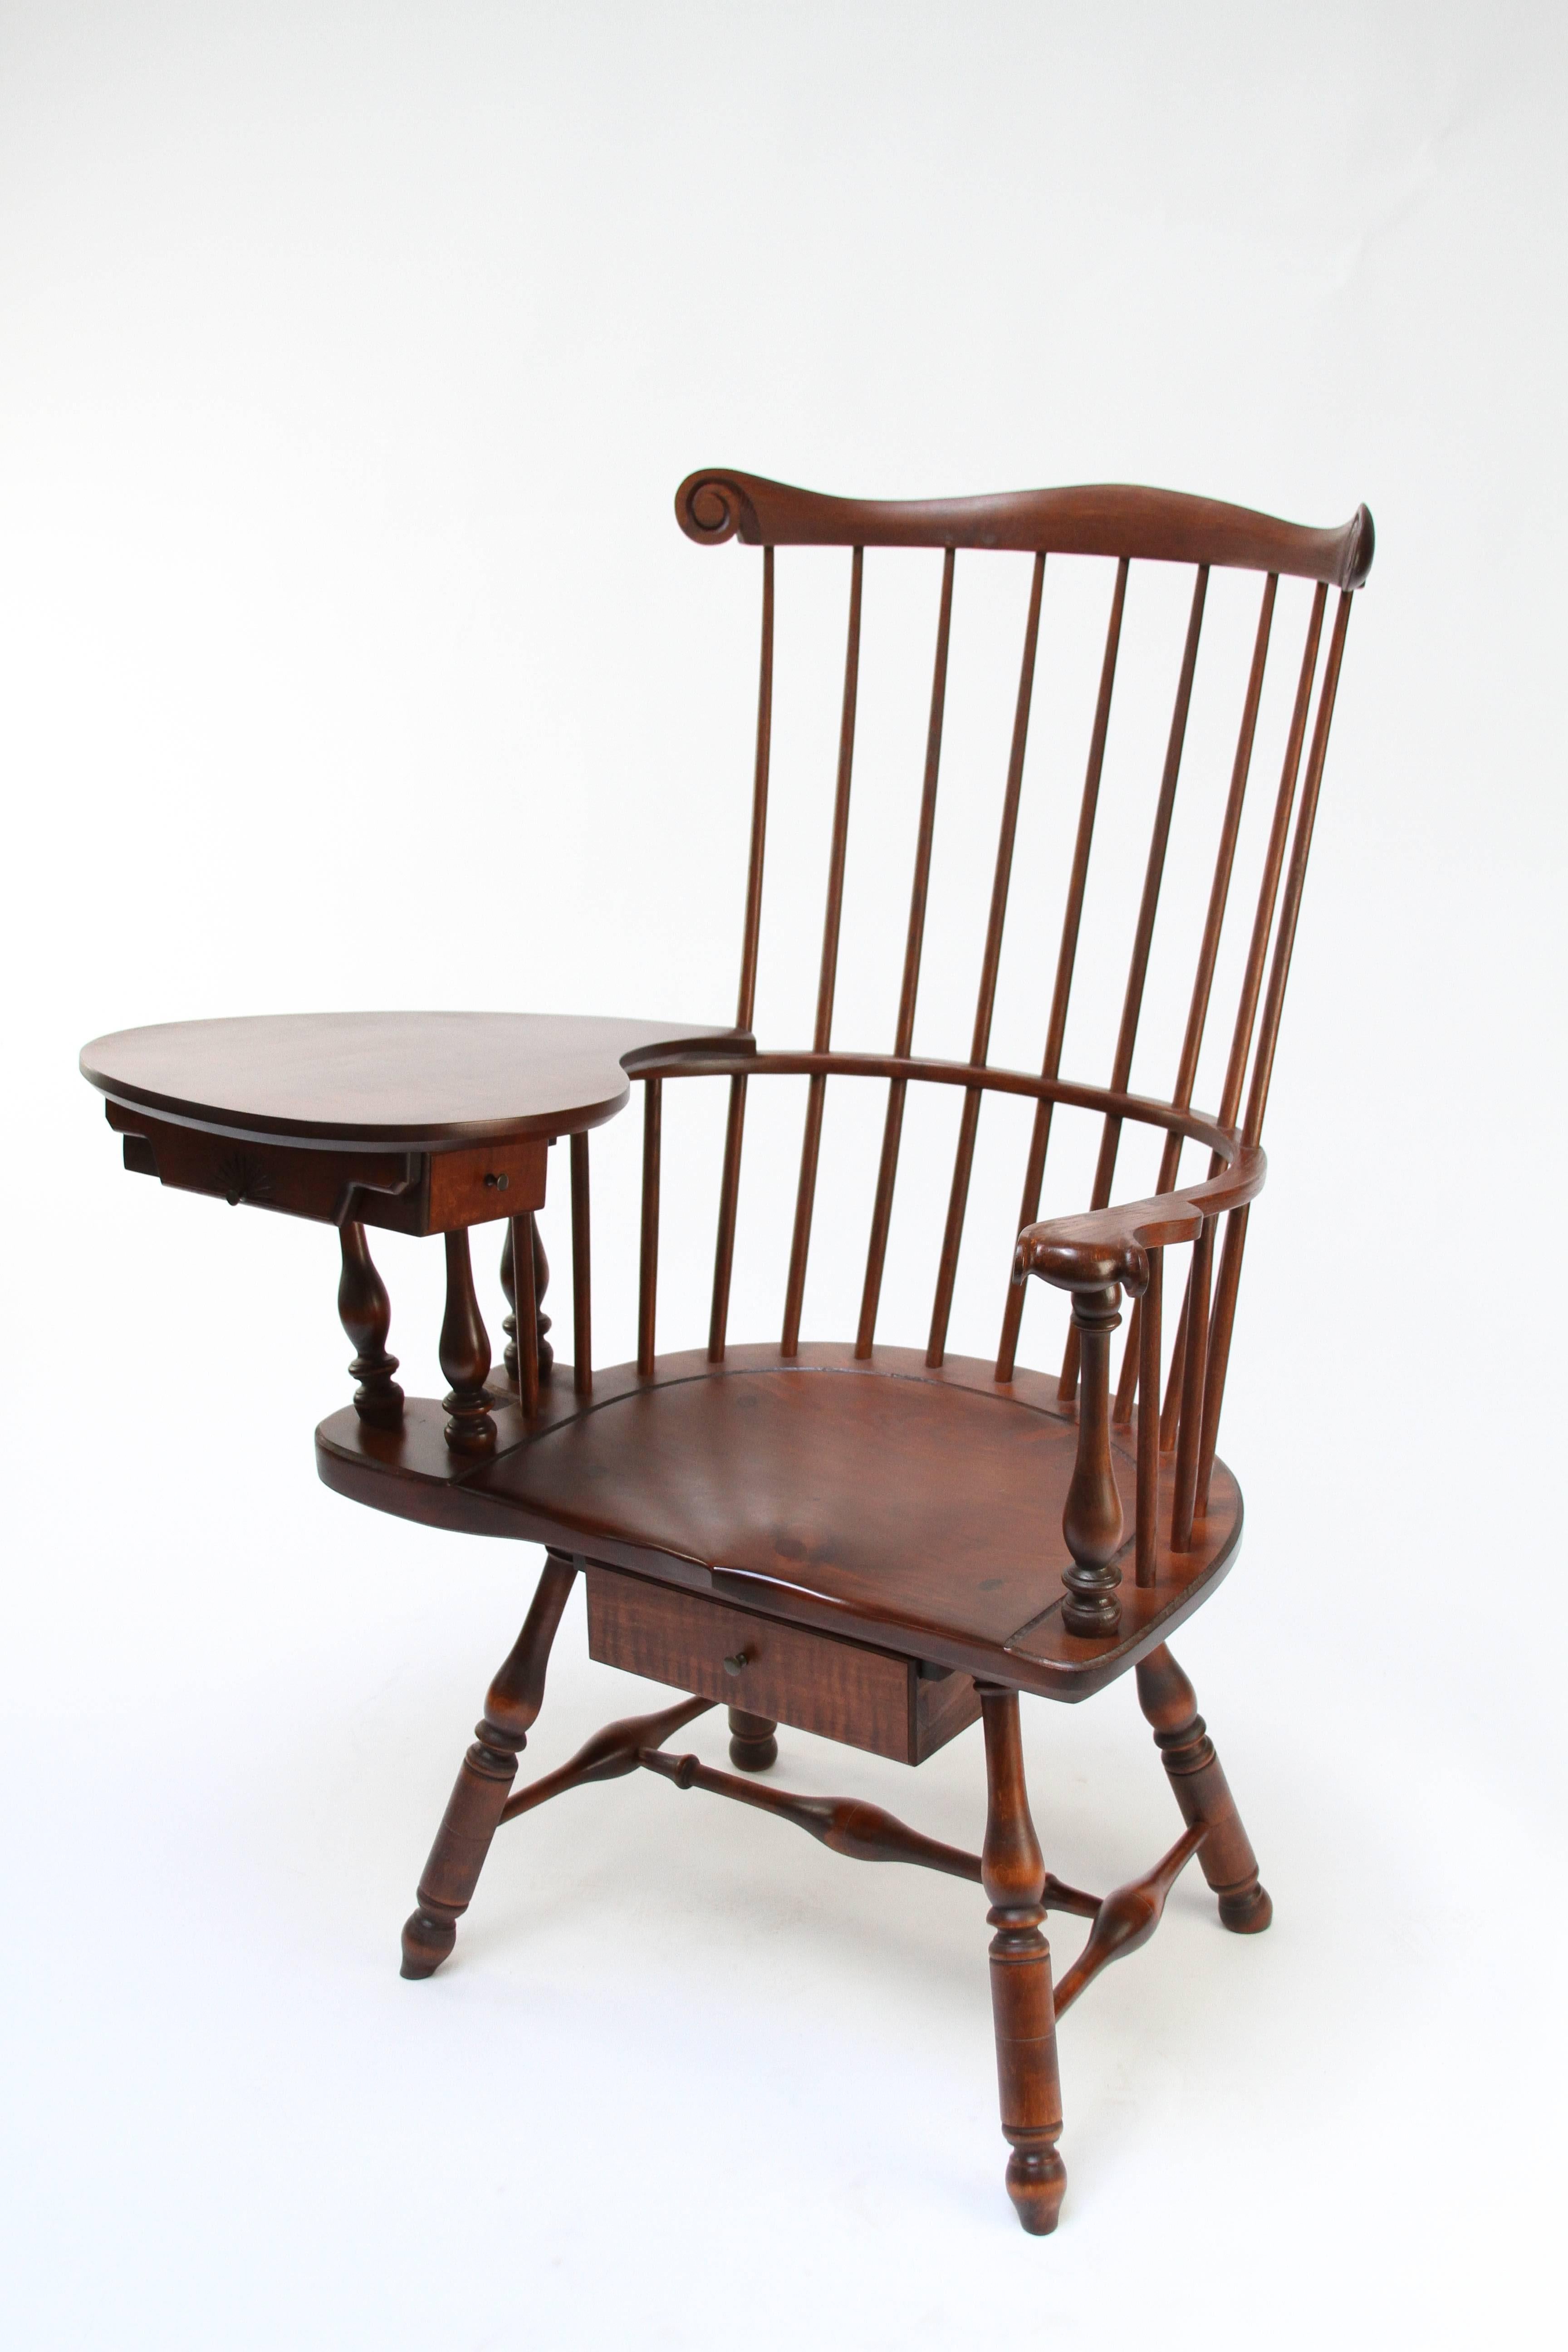 A modern heirloom that can be enjoyed for generations. The design can be ordered with a right-handed or left-handed writing desk. The finish shown is called Early American stain and this piece is built with a pine seat and a hand-carved Knuckle on